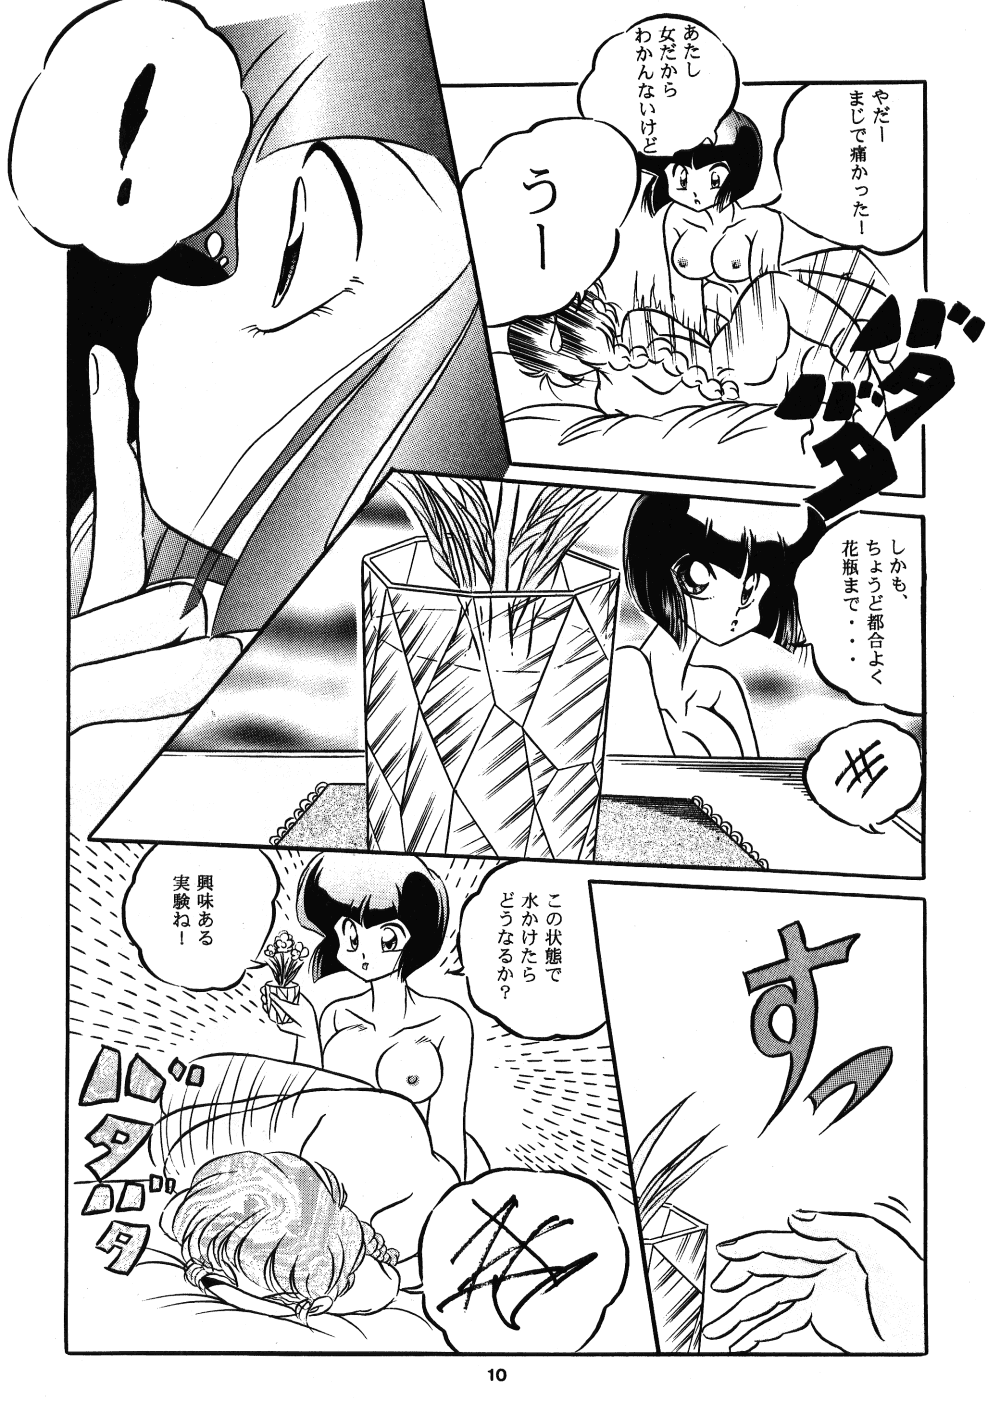 [C-Company] C-COMPANY SPECIAL STAGE 15 (Darkstalkers, Ranma 1/2) page 11 full